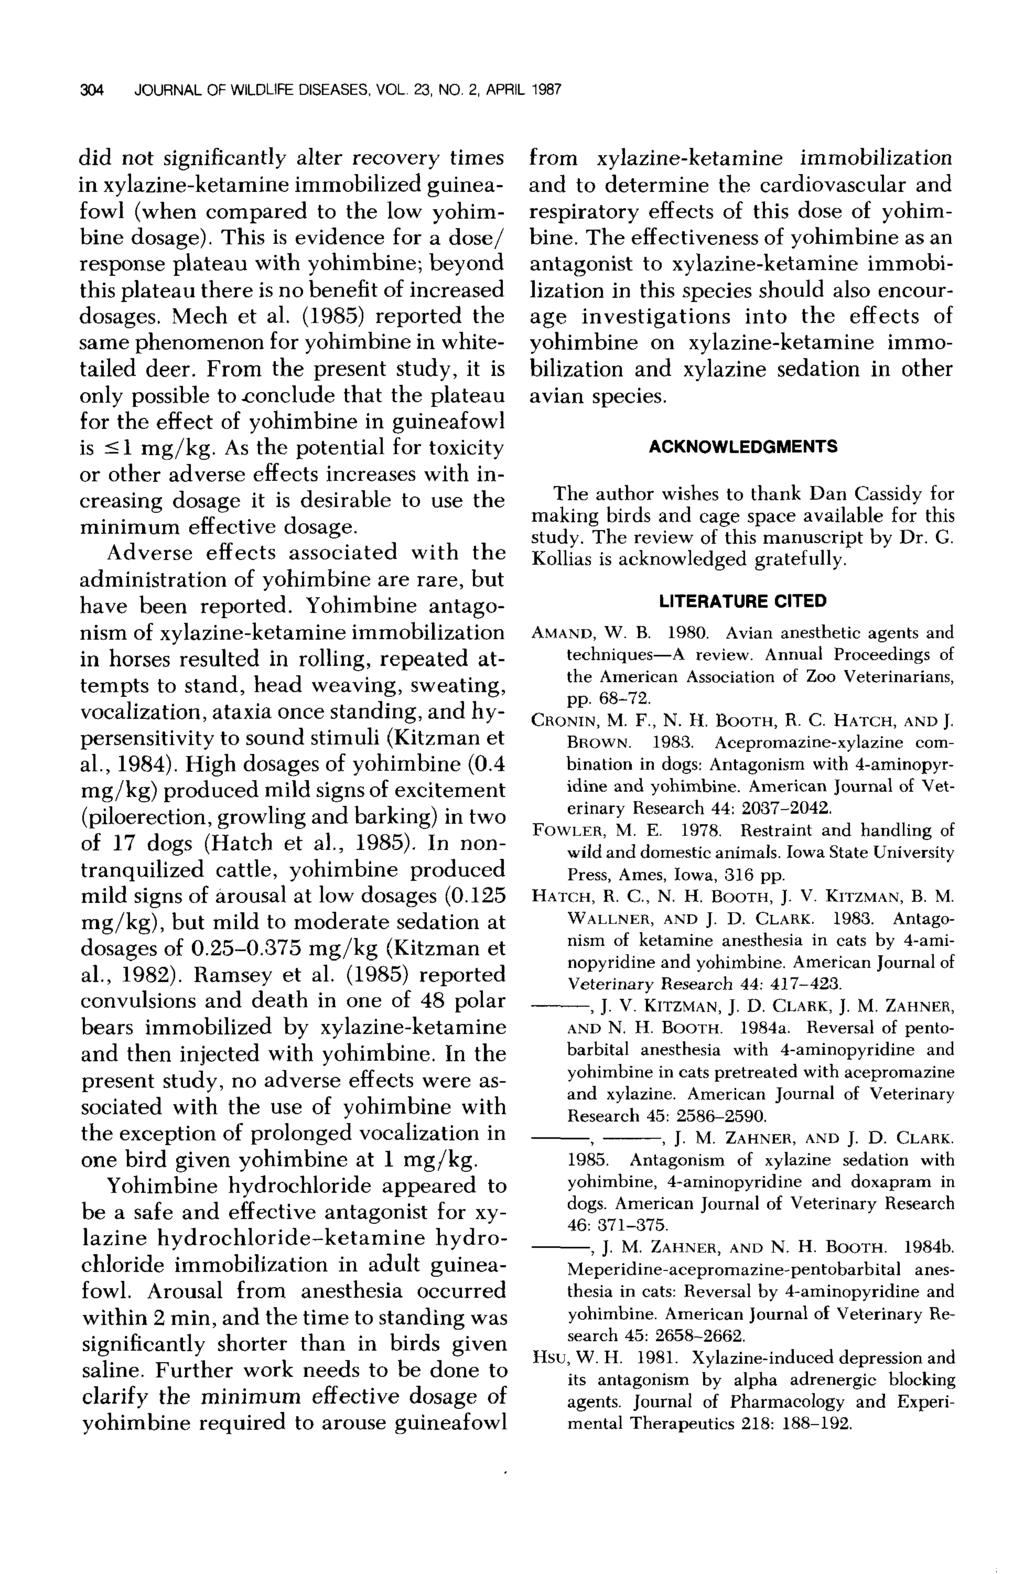 304 JOURNAL OF WILDLIFE DISEASES, VOL. 23, NO. 2, APRIL 1987 did not significantly alter recovery times in xylazine-ketamine immobilized guineafowl (when compared to the low yohimbine dosage).